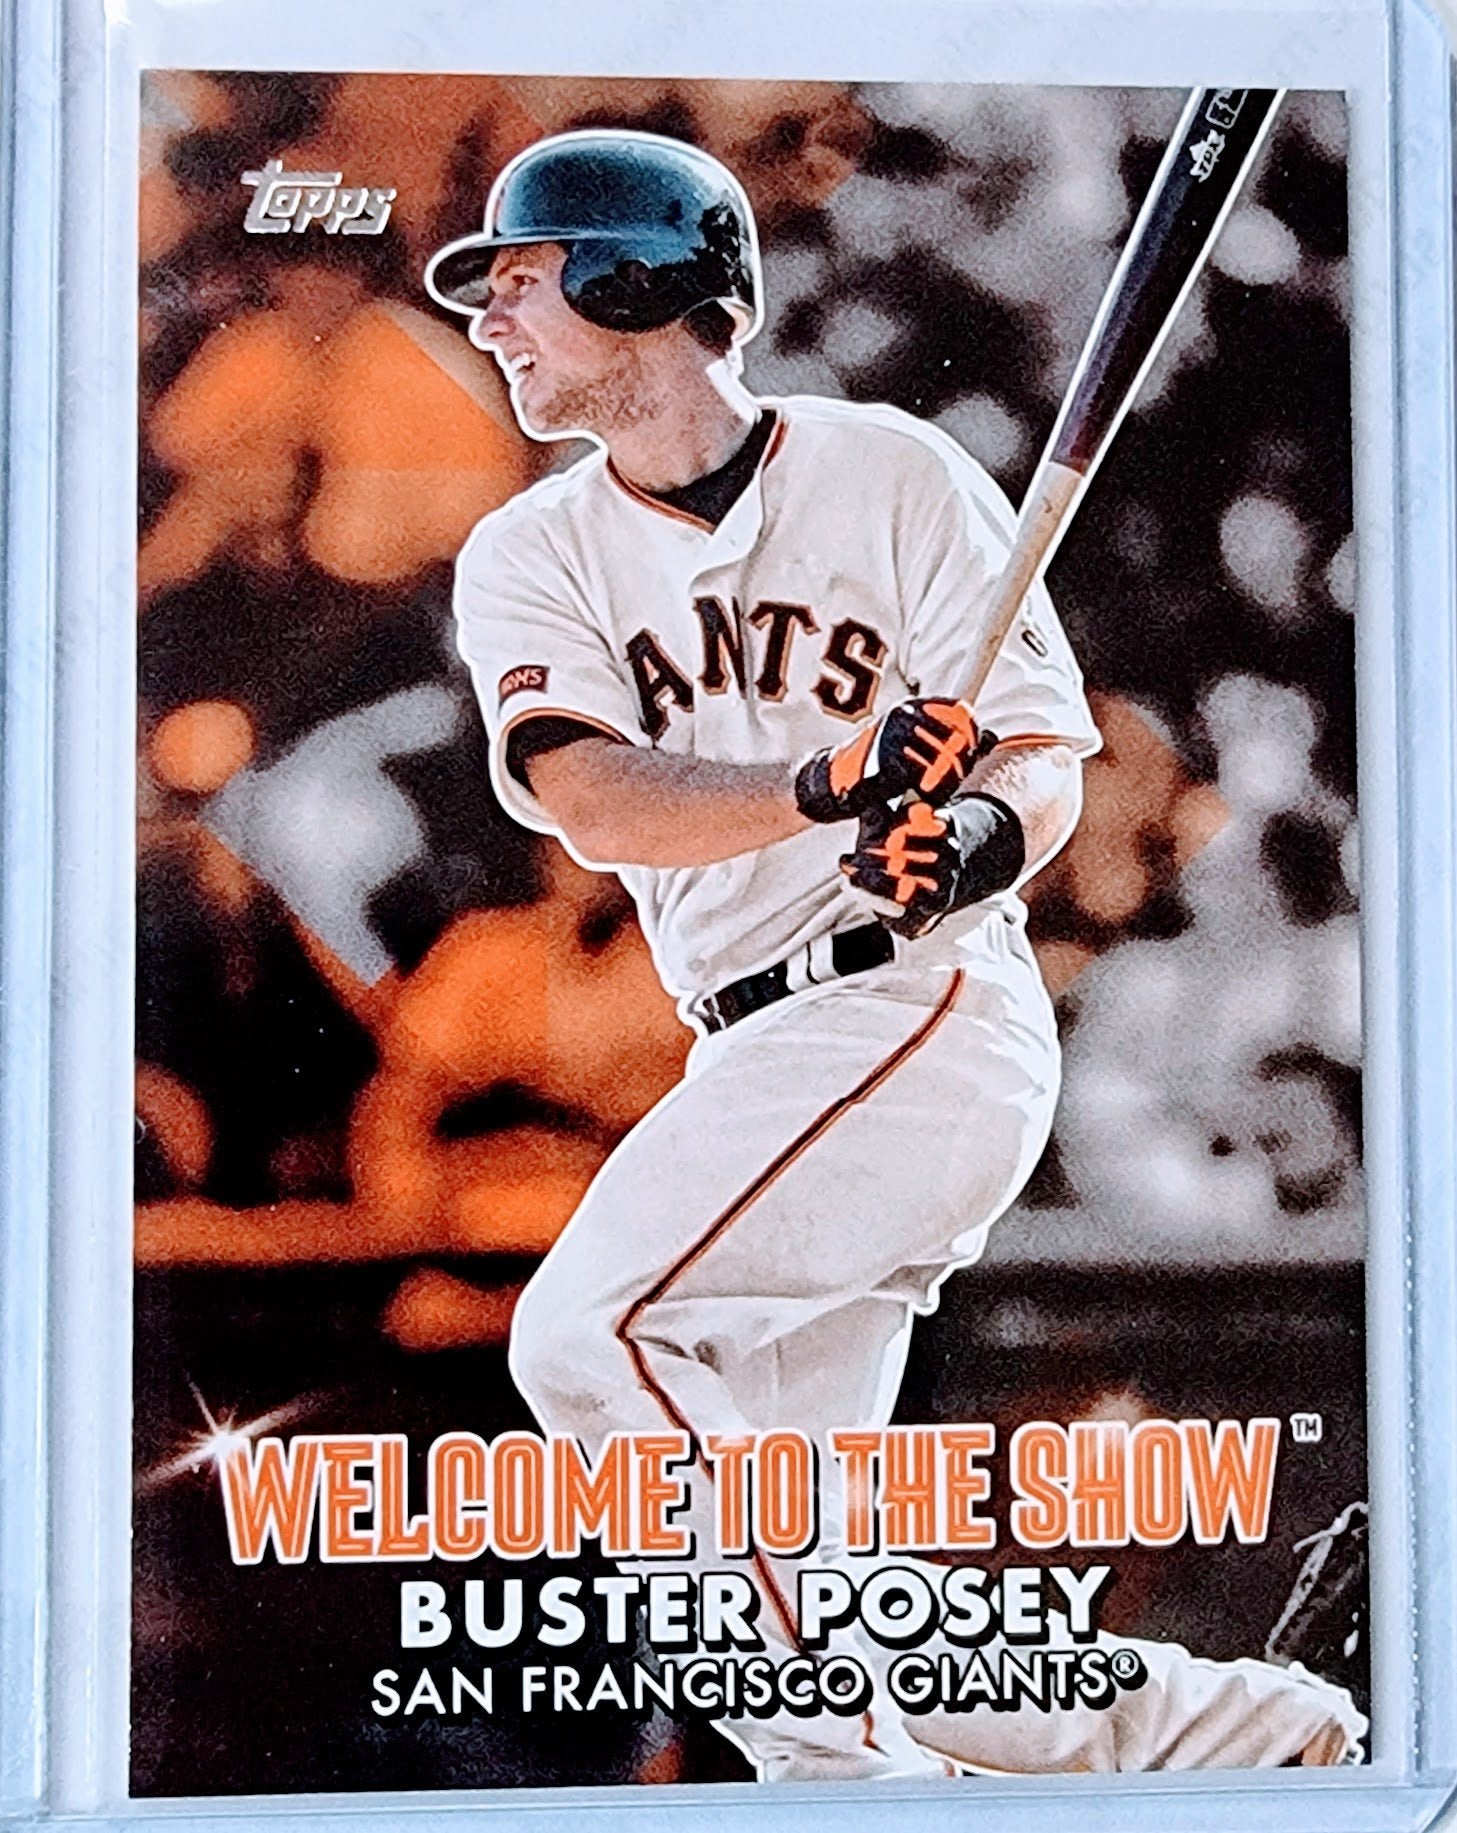 2022 Topps Buster Posey Welcome to the Show Baseball Trading Card GRB1 simple Xclusive Collectibles   